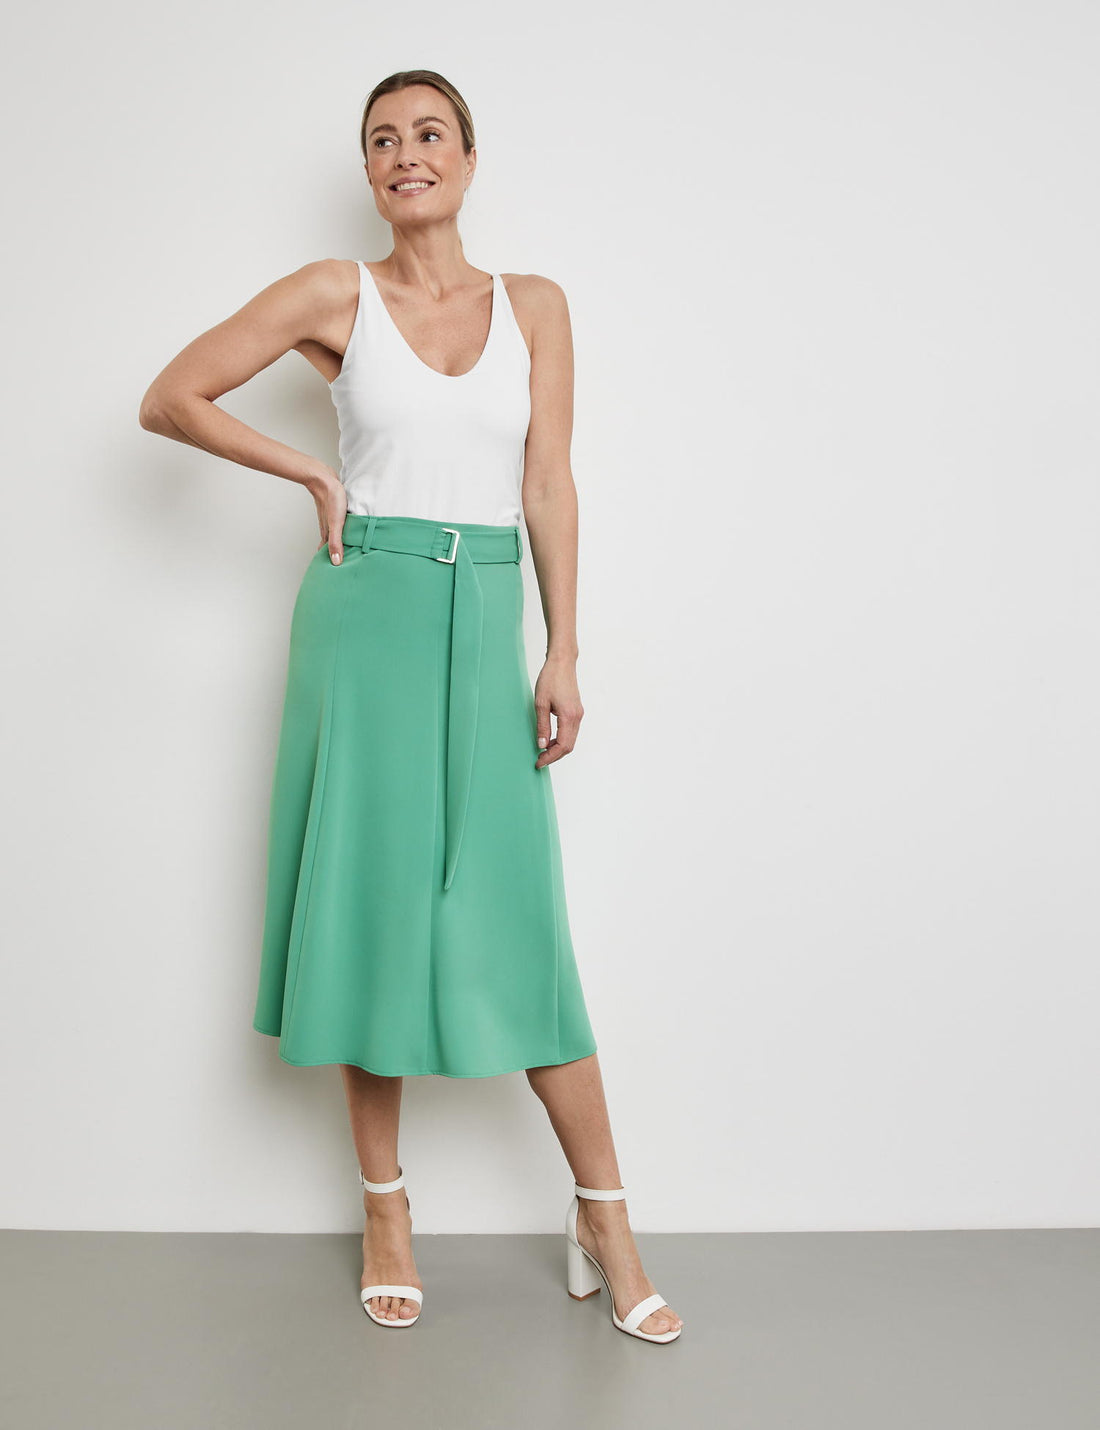 Skirt In An A-Line Design With A Tie-Around Belt_310011-31263_50946_01